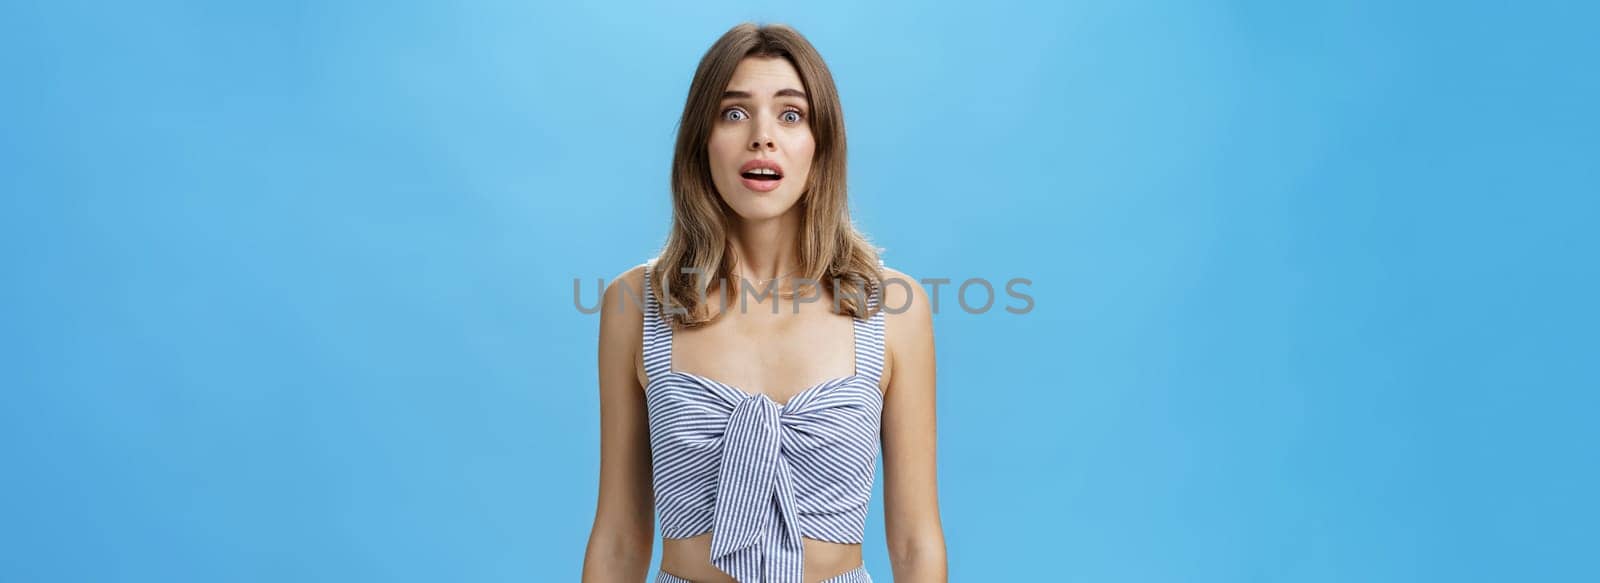 Portrait of silly desperate and upset cute attractive woman with diastema open mouth gasping and frowning from worry and troublesome situation looking with begging eyes at camera over blue wall. Emotions concept